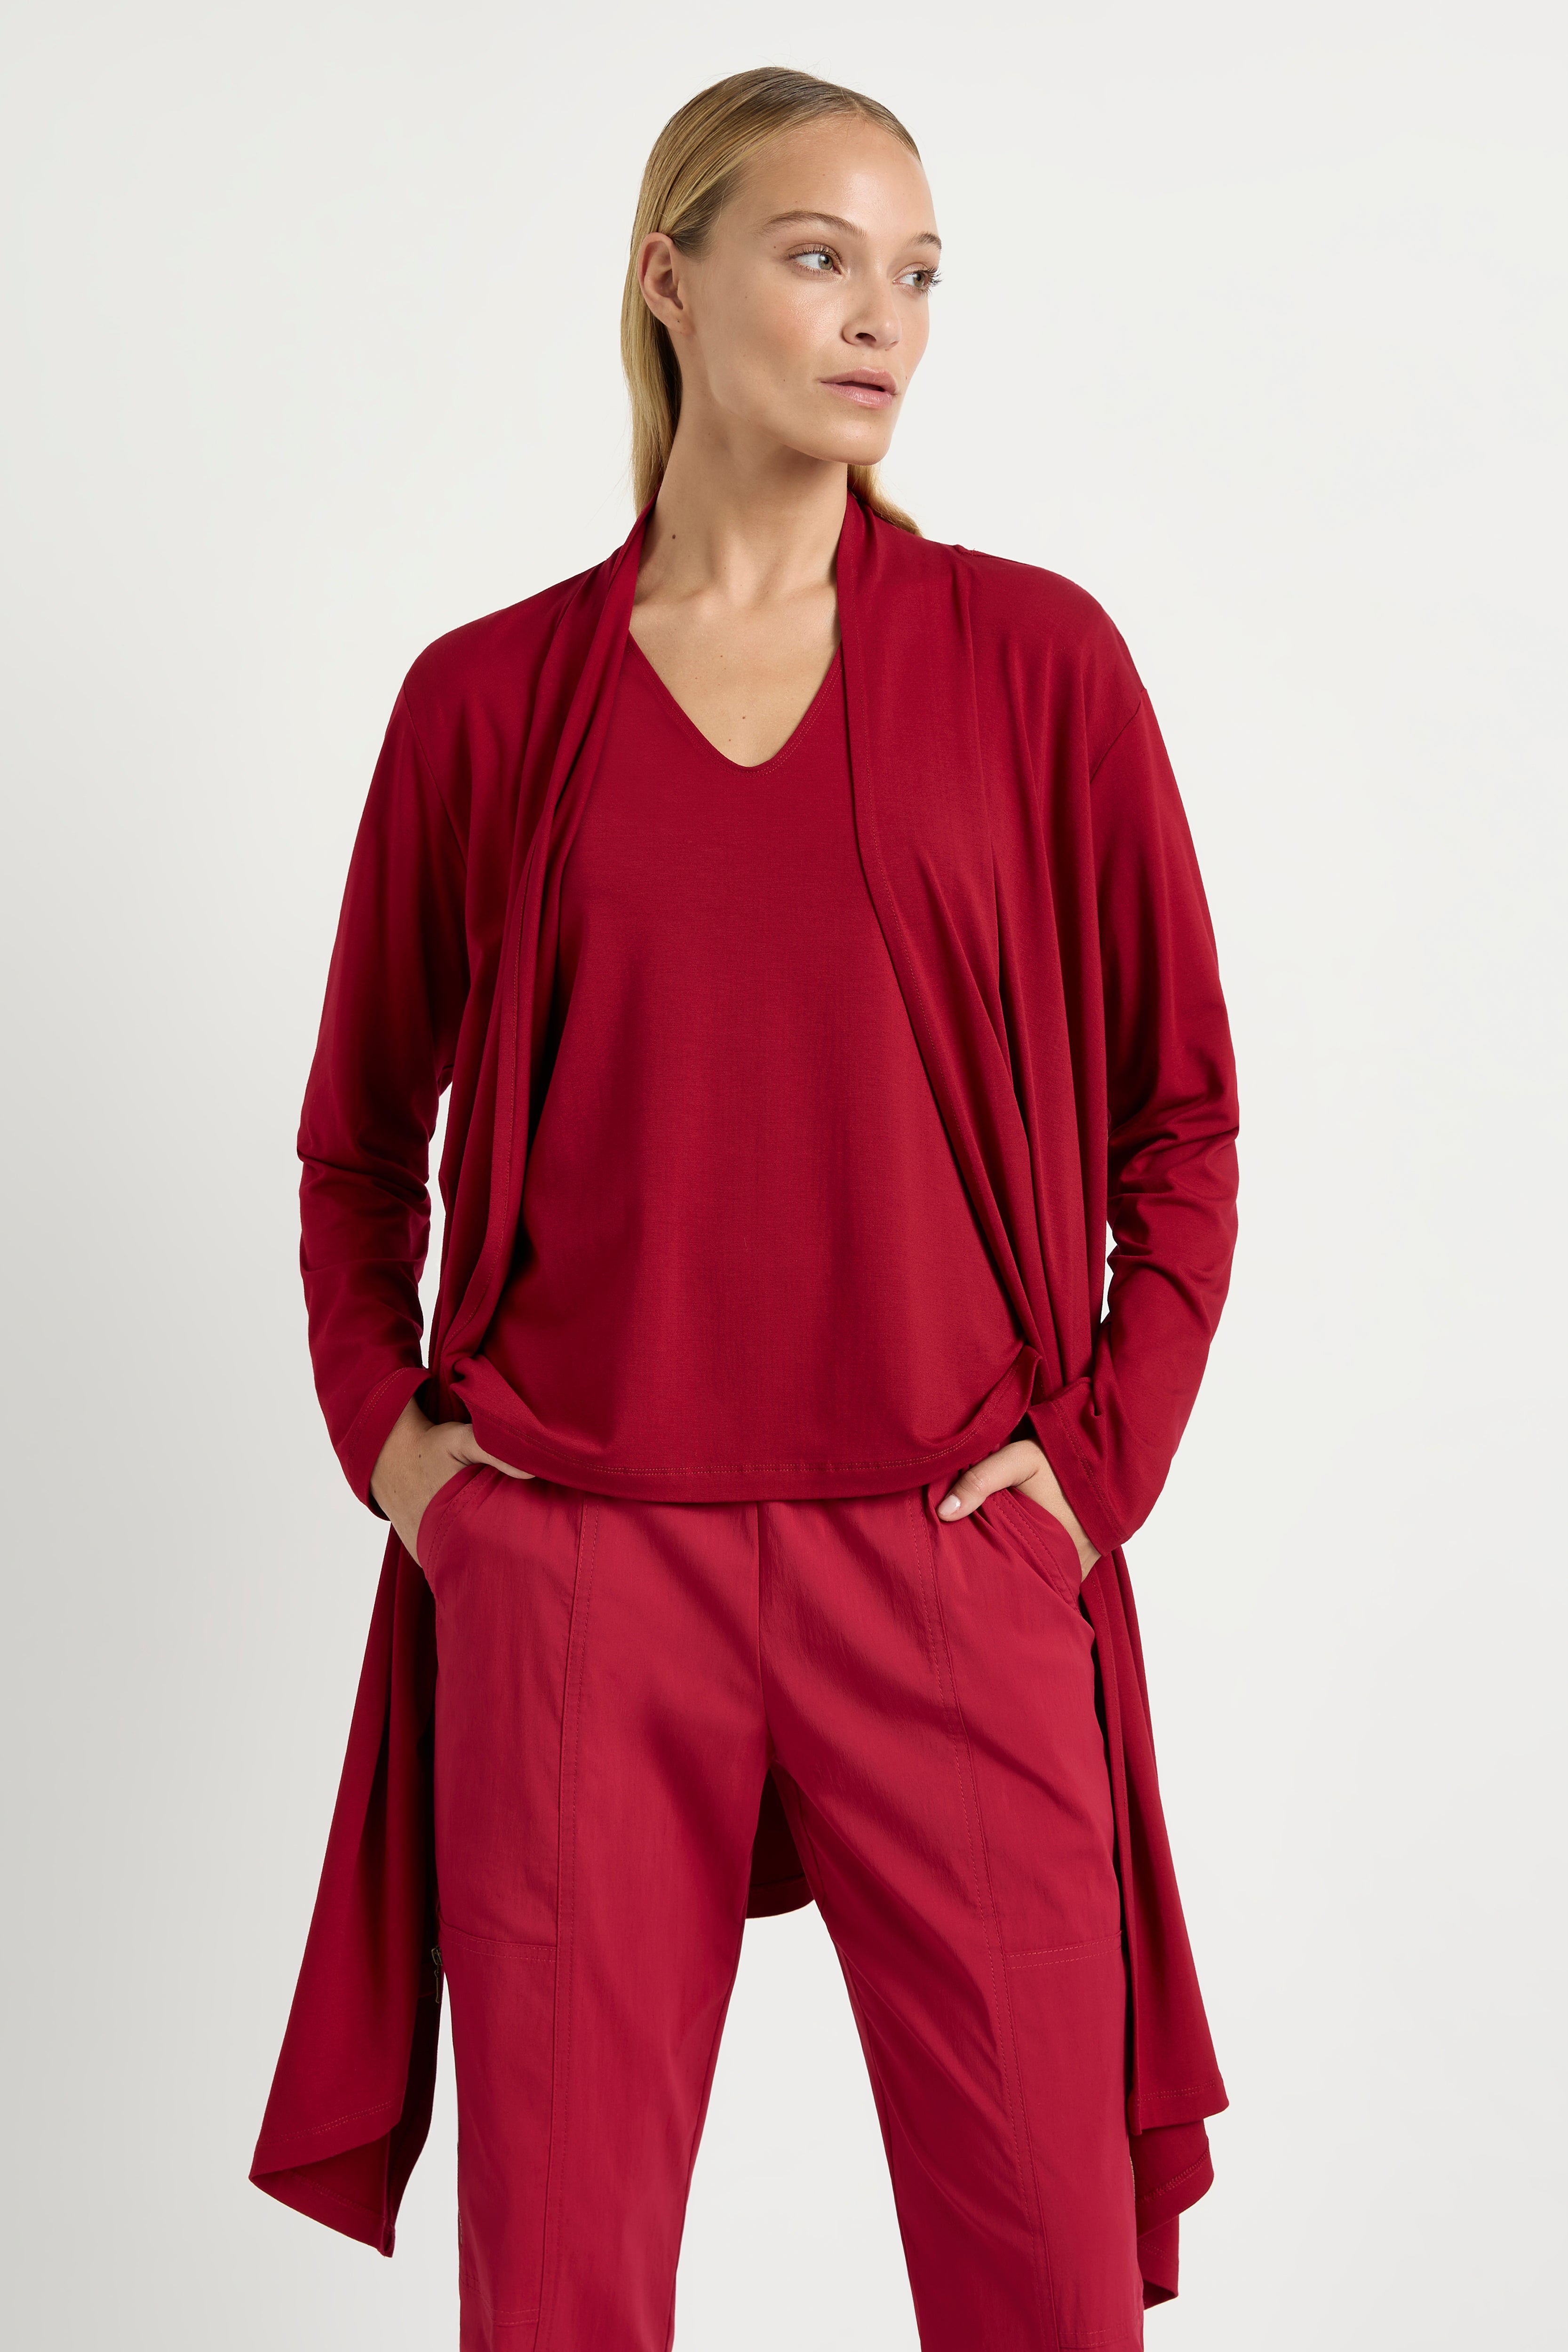 Mela Purdie Relaxed V Top Jersey